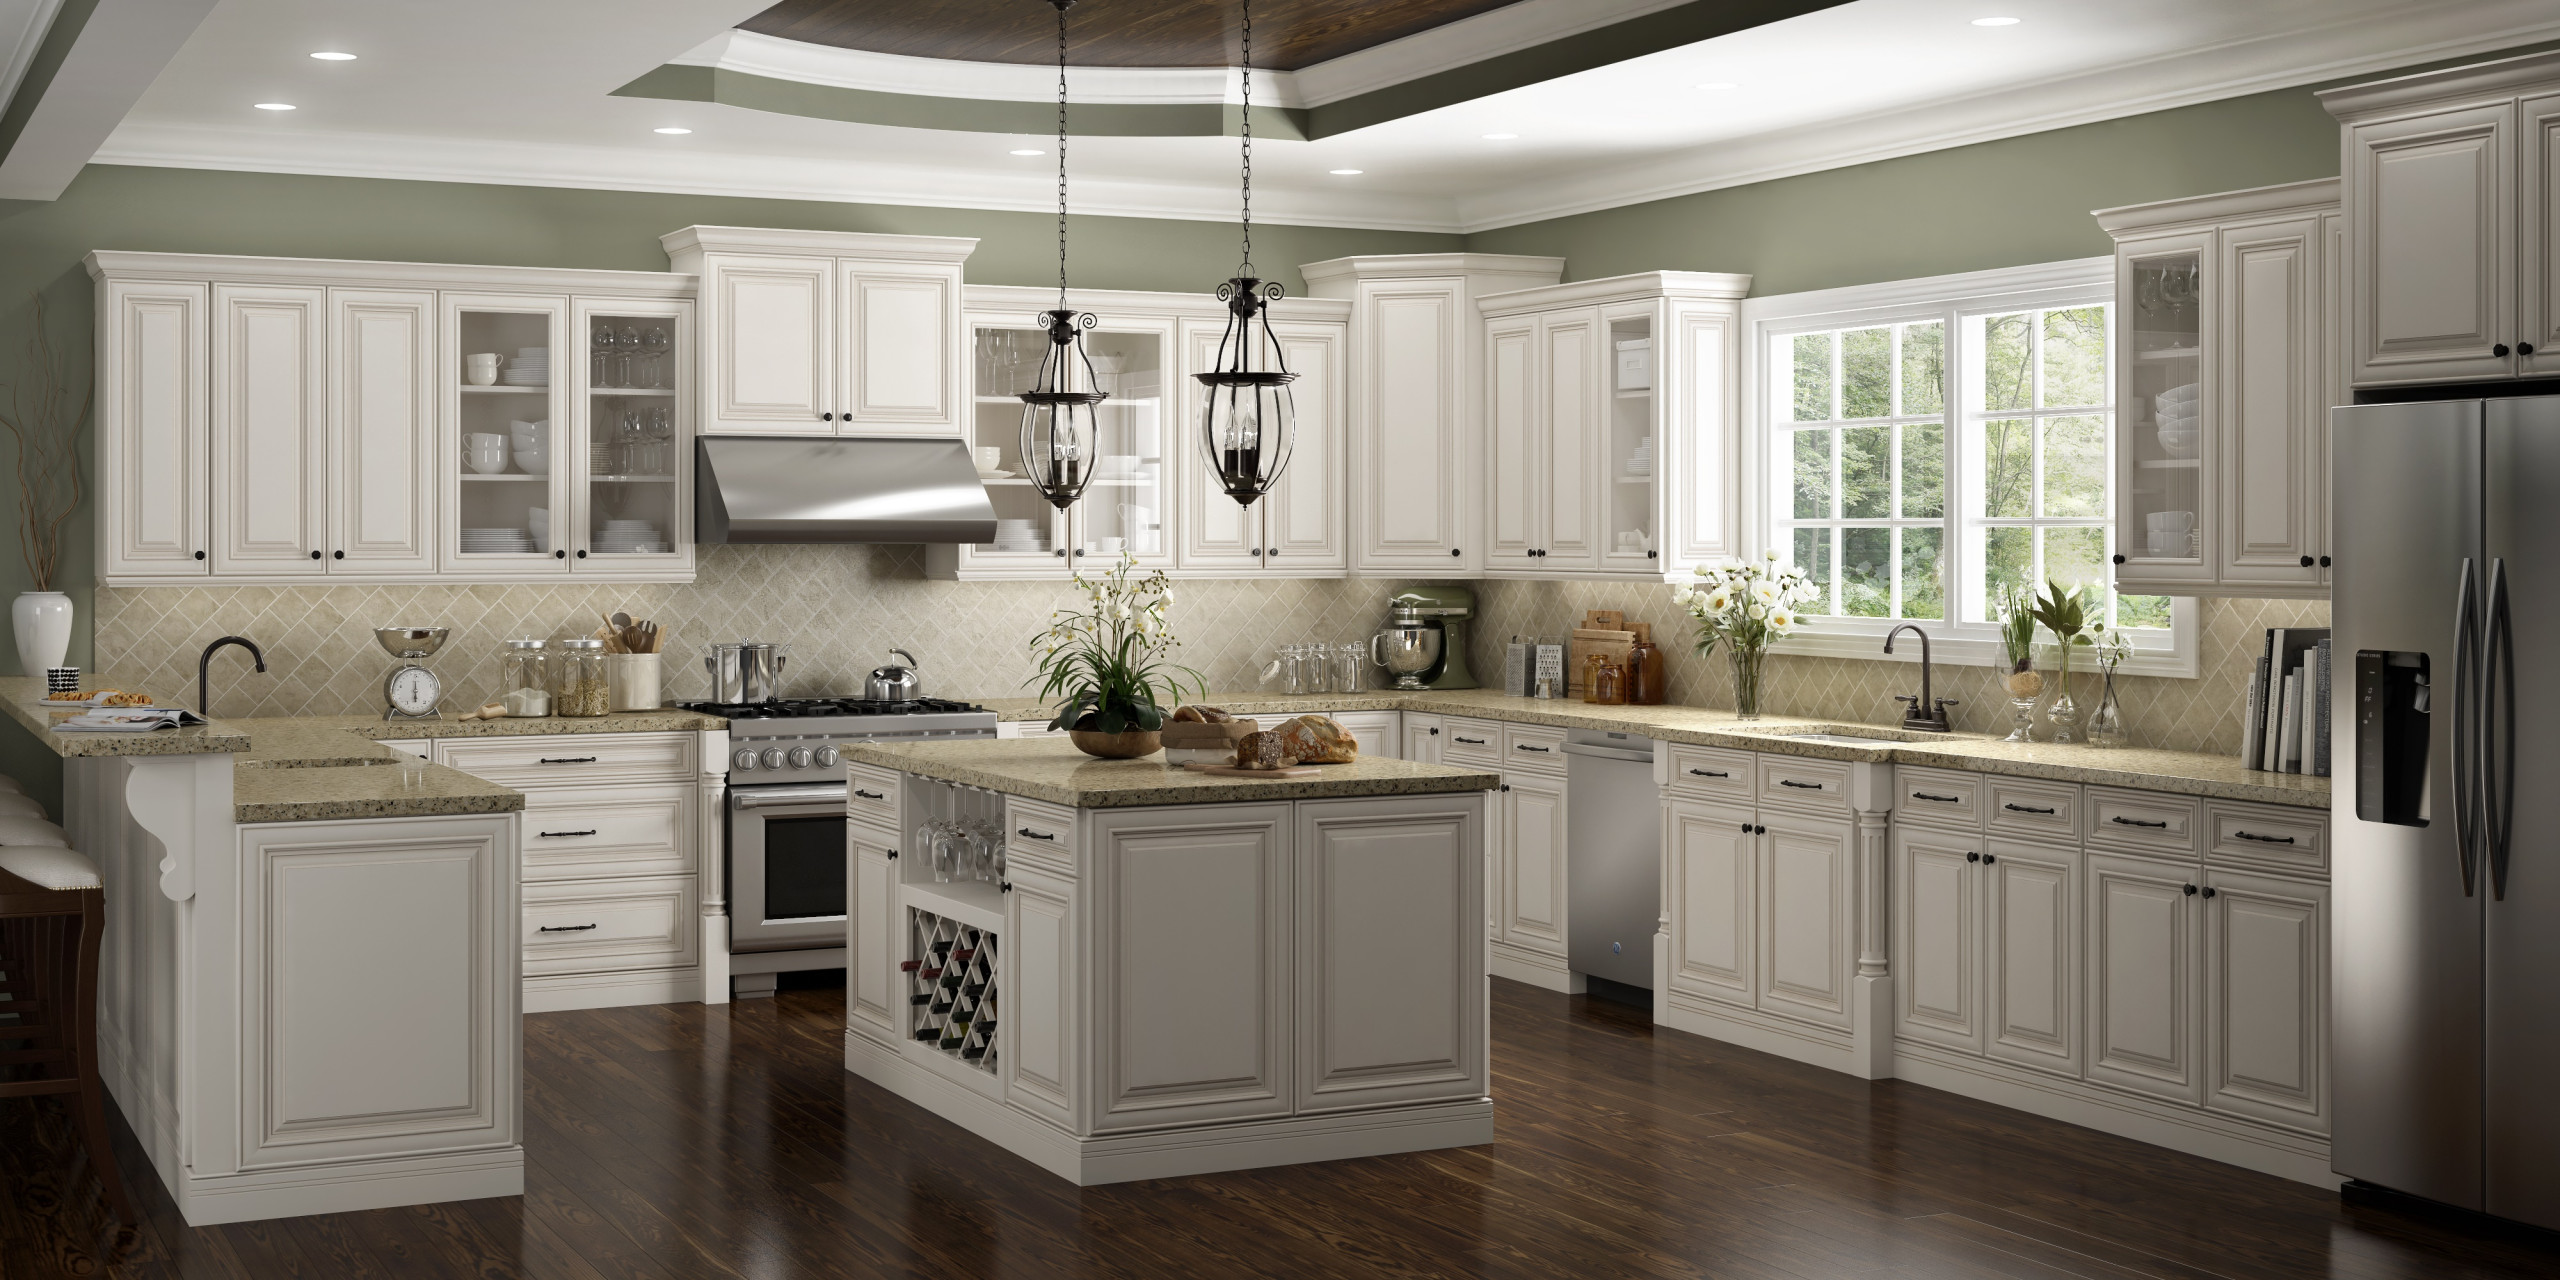 Frameless Flat Front Kitchen Cabinets can be painted to our clients choice. Custom fit and Installed, Modern styles and beautiful kitchen cabinets. Laundry, Office, Bar Area Cabinets. Amoraz is your c